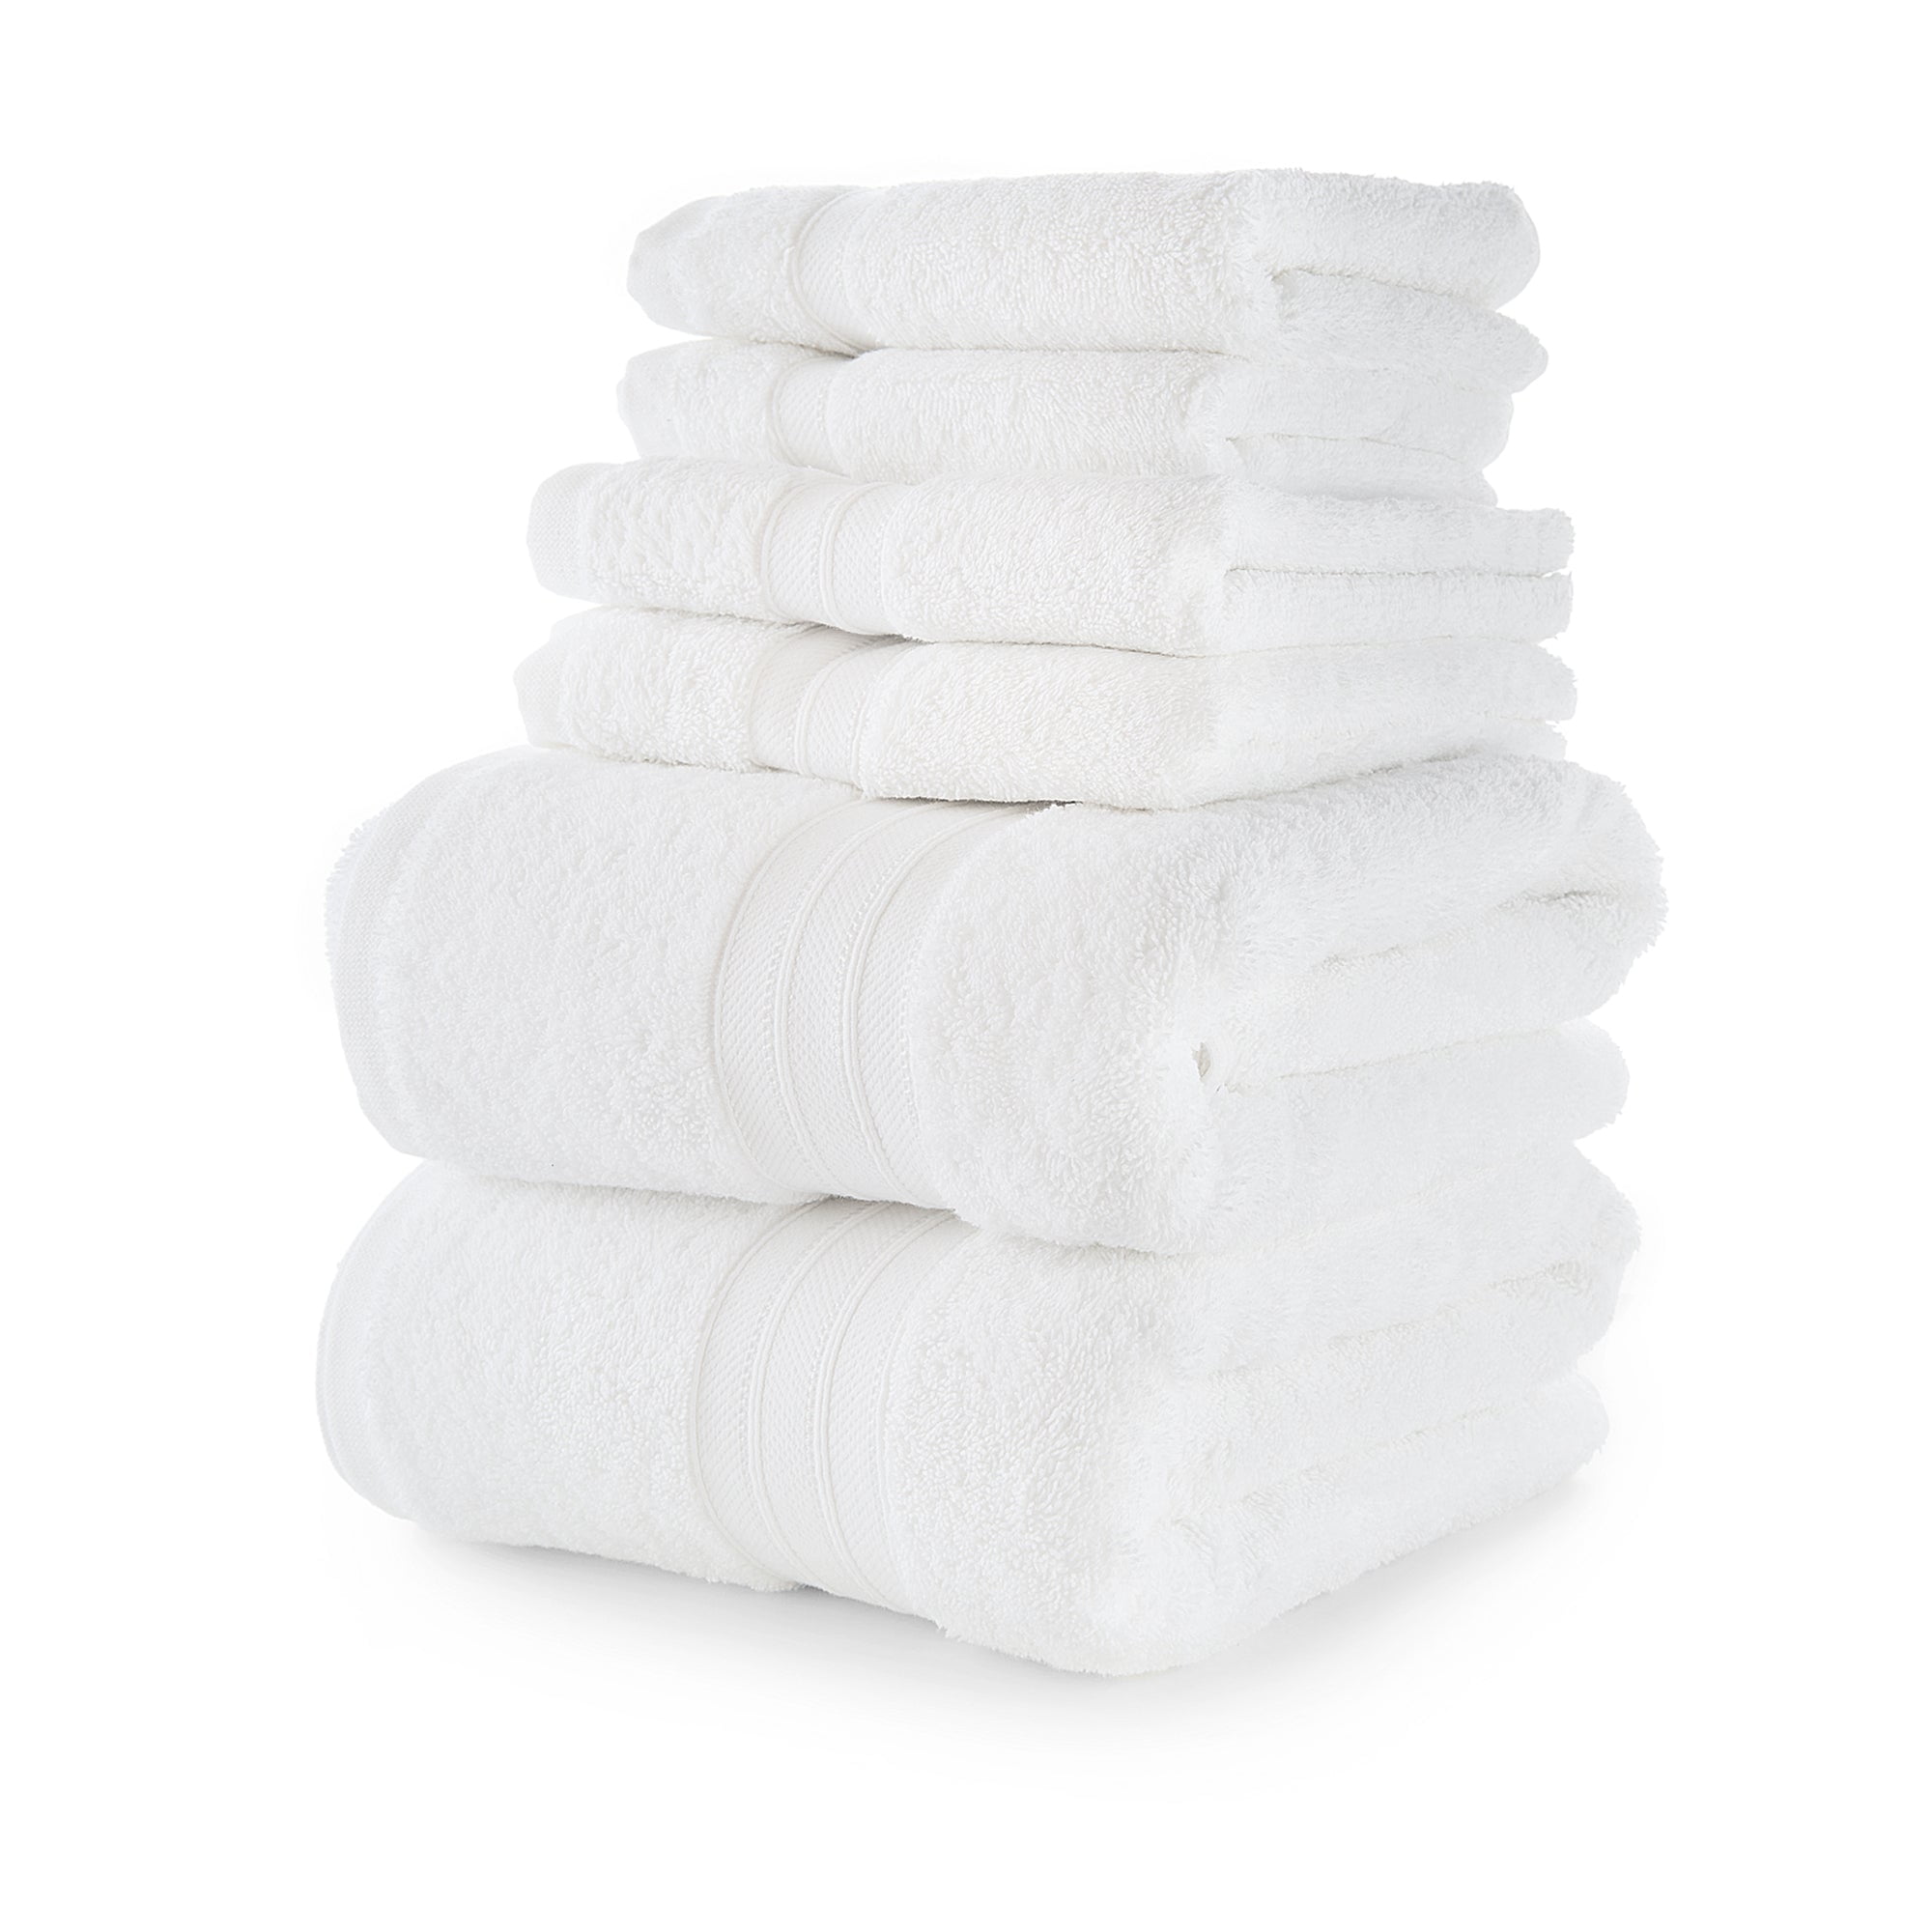 Washcloths, 100% Terry Cotton, Pack of 12 – Mellanni